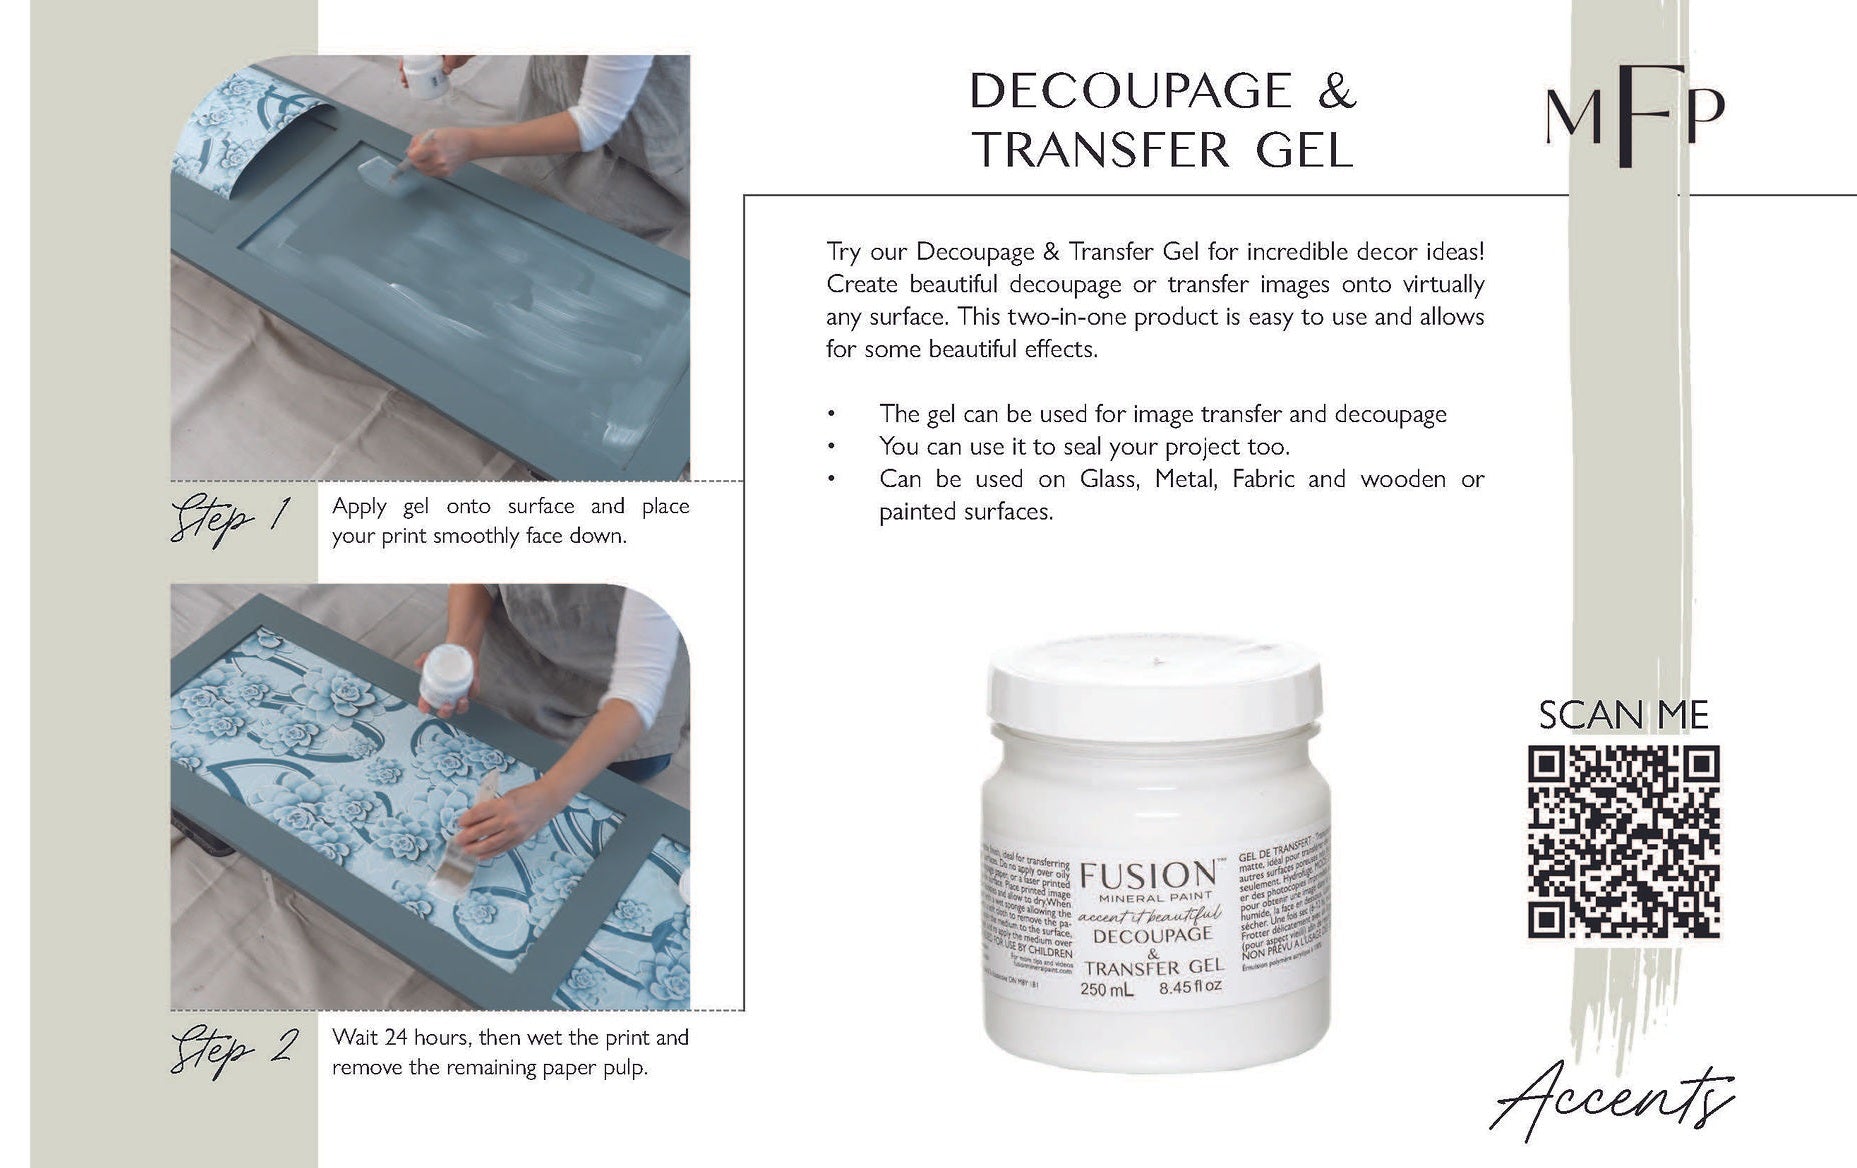 How to use fusion decoupage and transfer gel